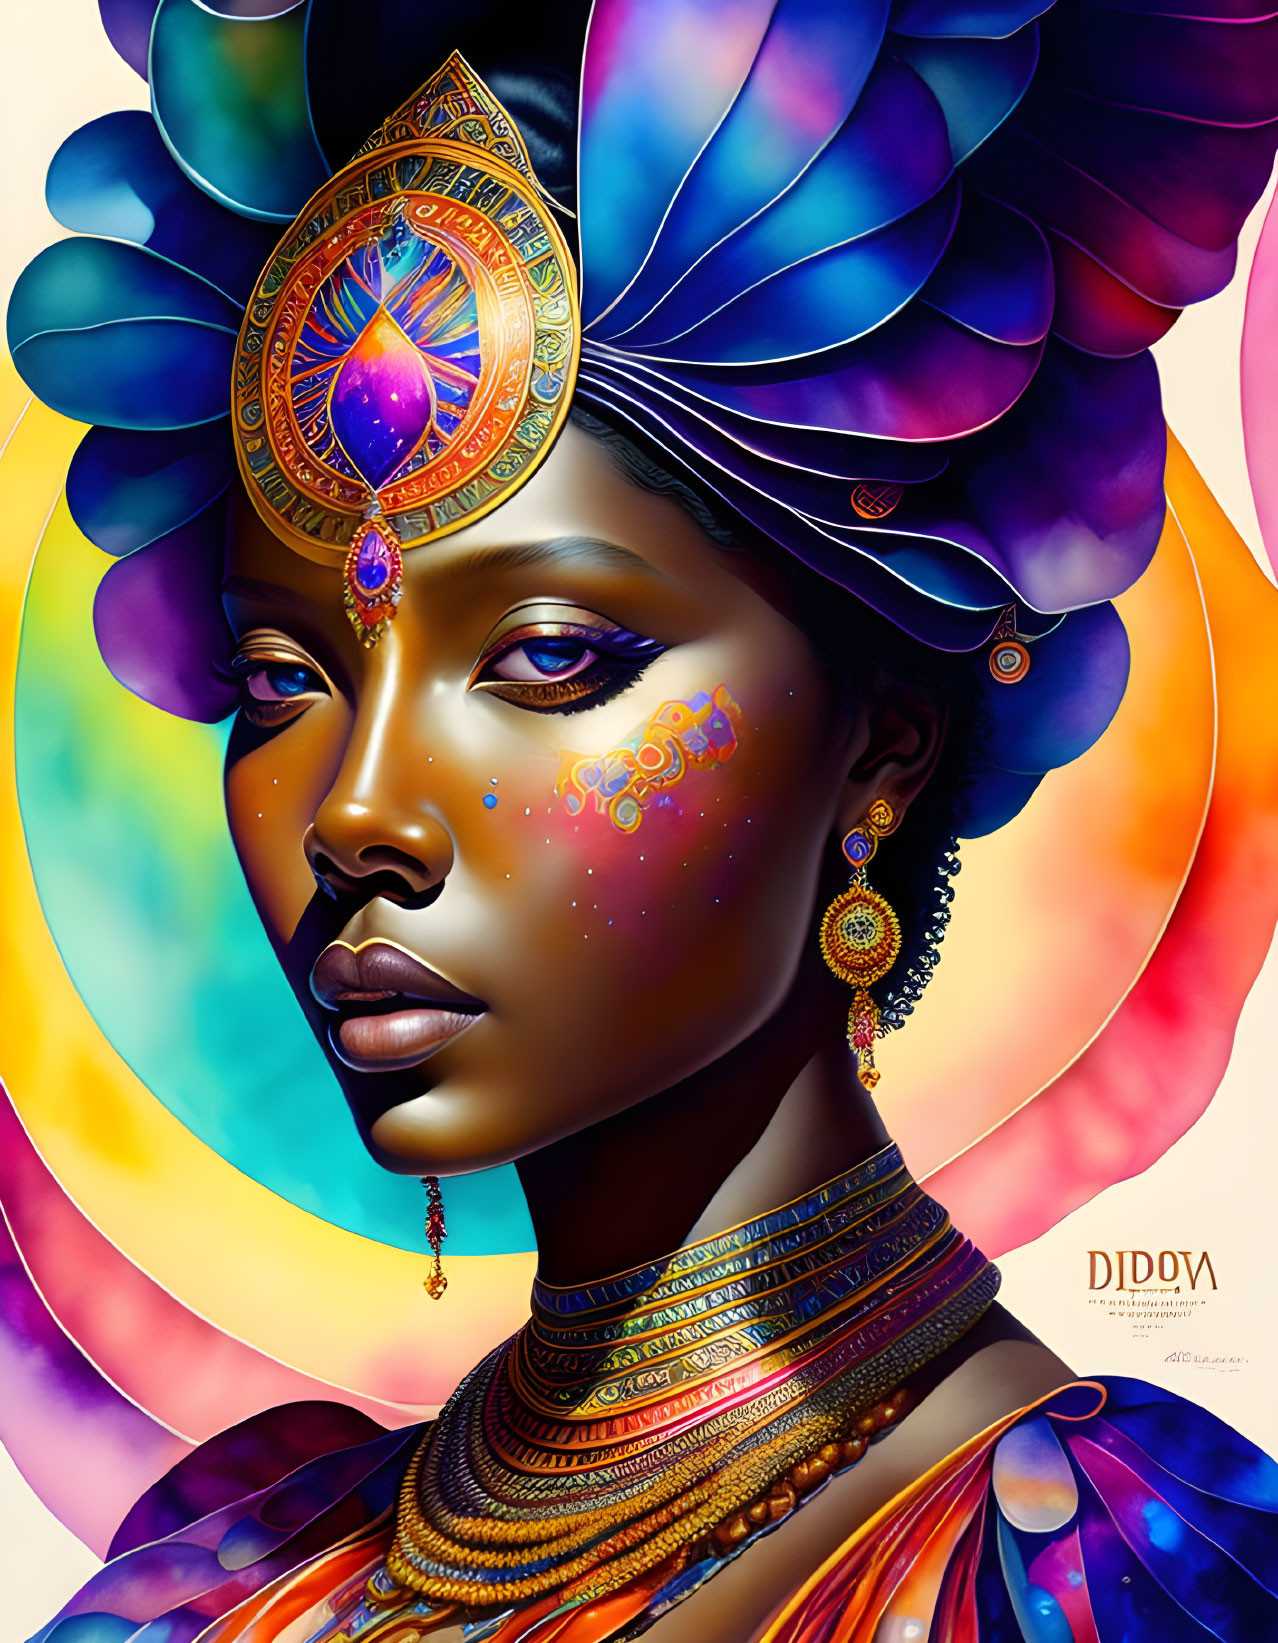 Colorful digital artwork of woman with ornate jewelry and headwear on multicolored backdrop